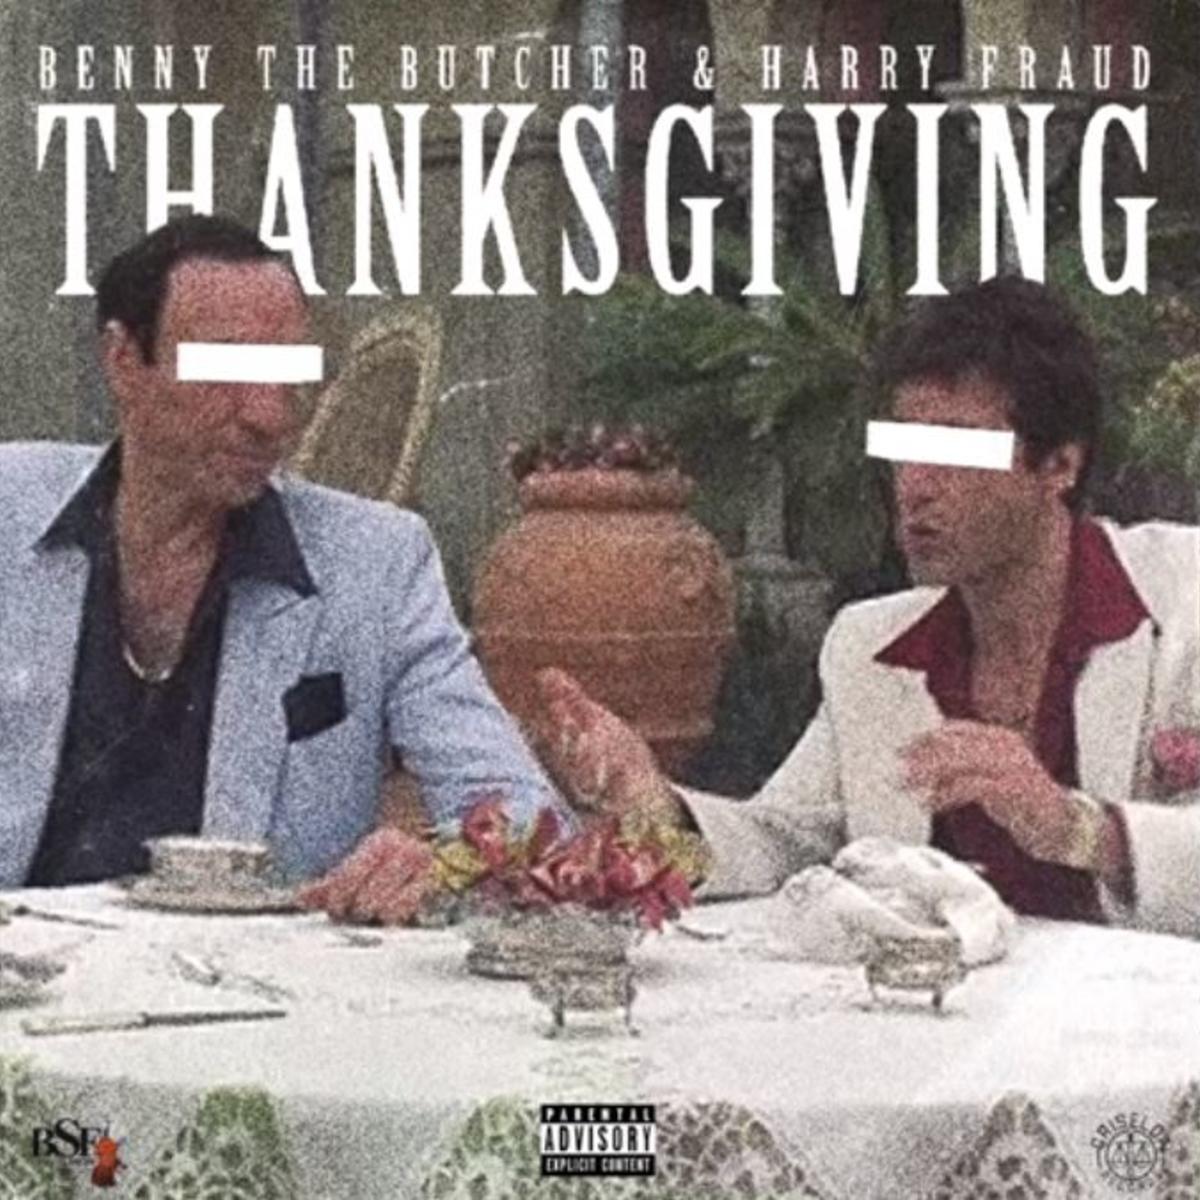 Benny The Butcher Talks About Wanting His Flowers In “Thanksgiving”